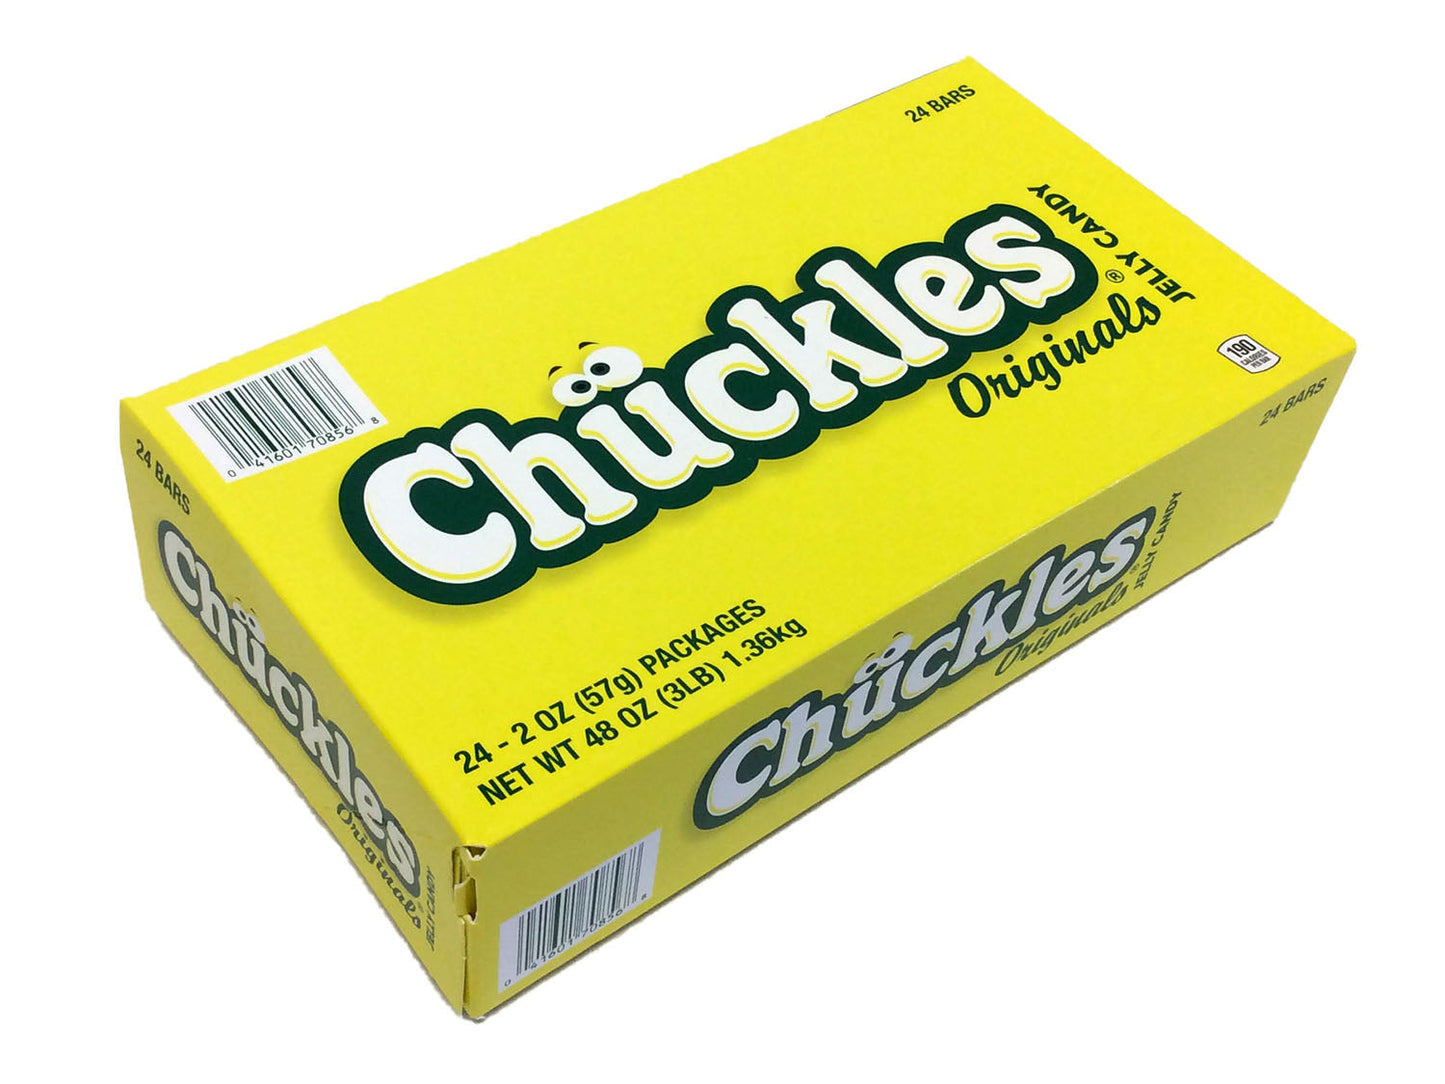 Chuckles - 2 oz pack - box of 24